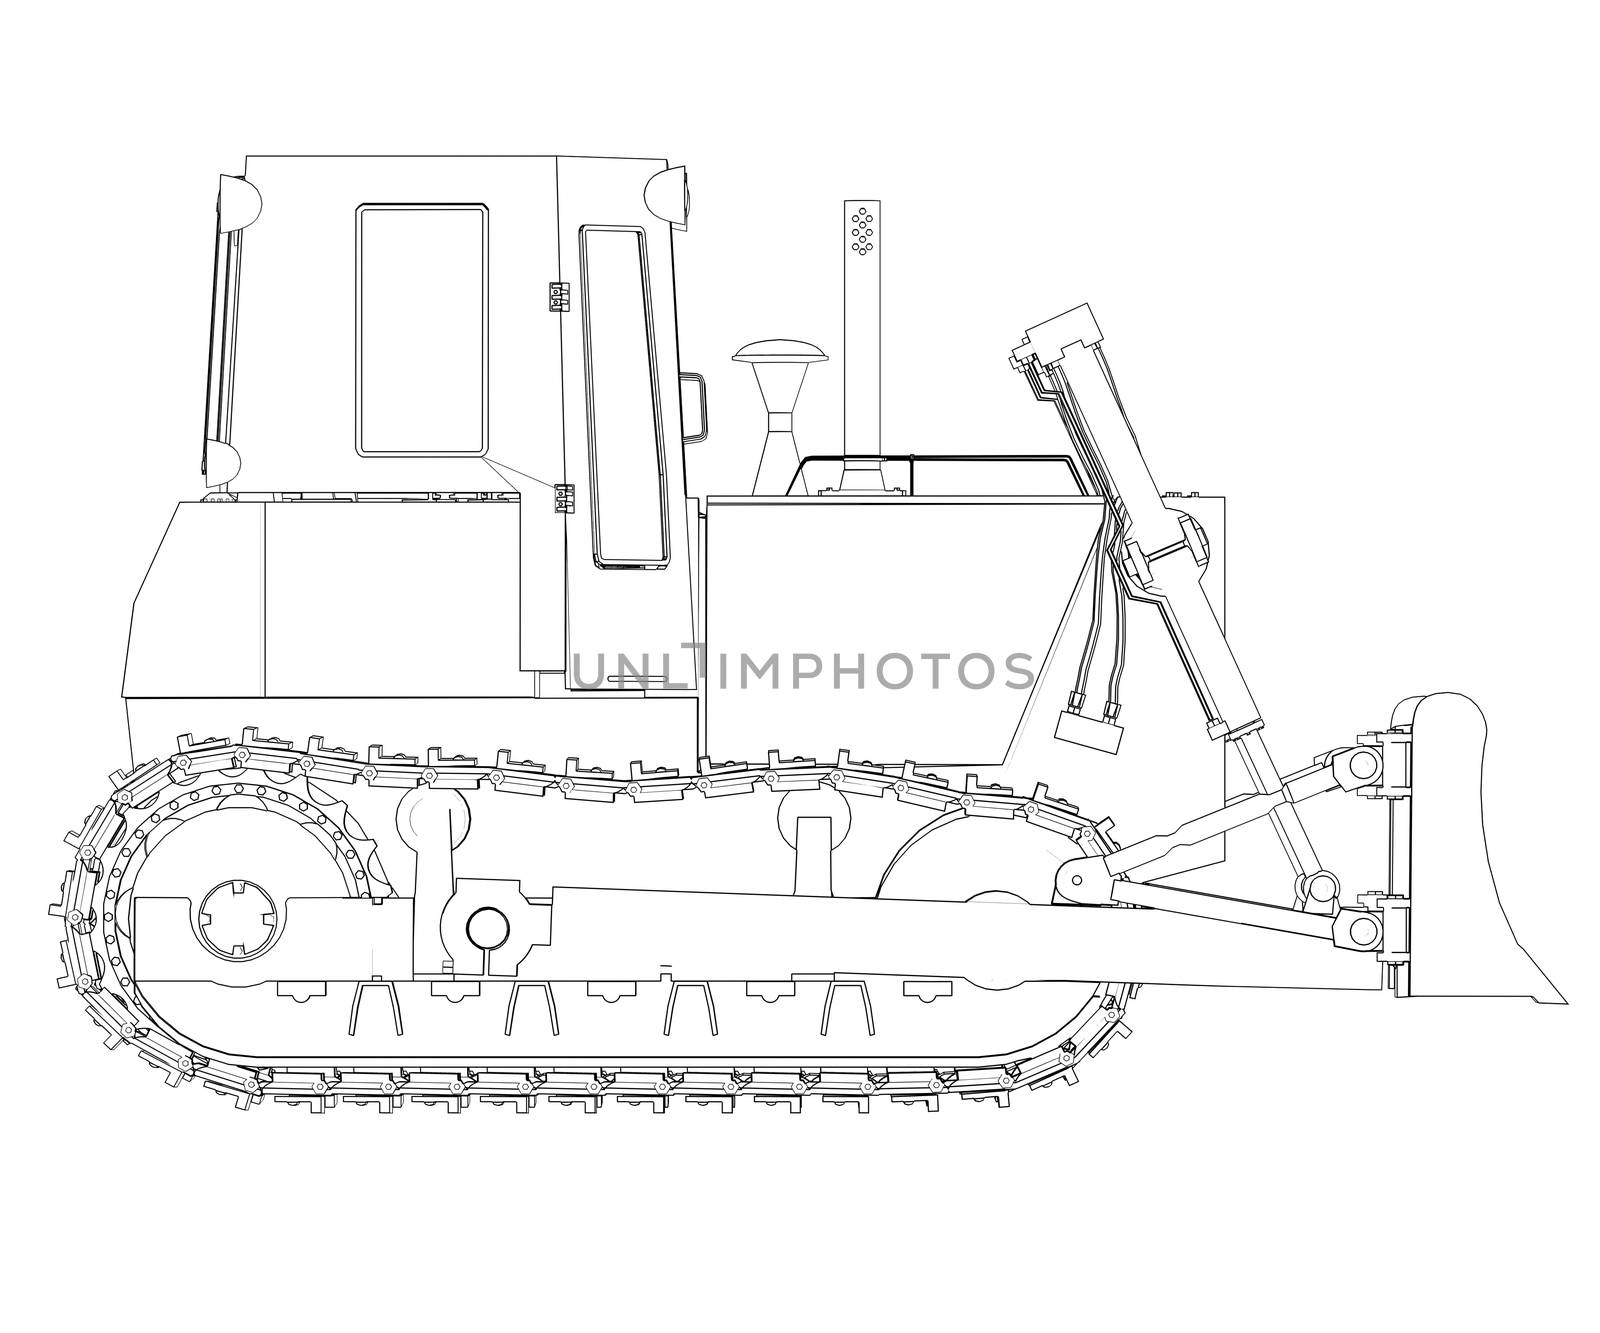 Tractor rendering in lines. Isolated render on a white background